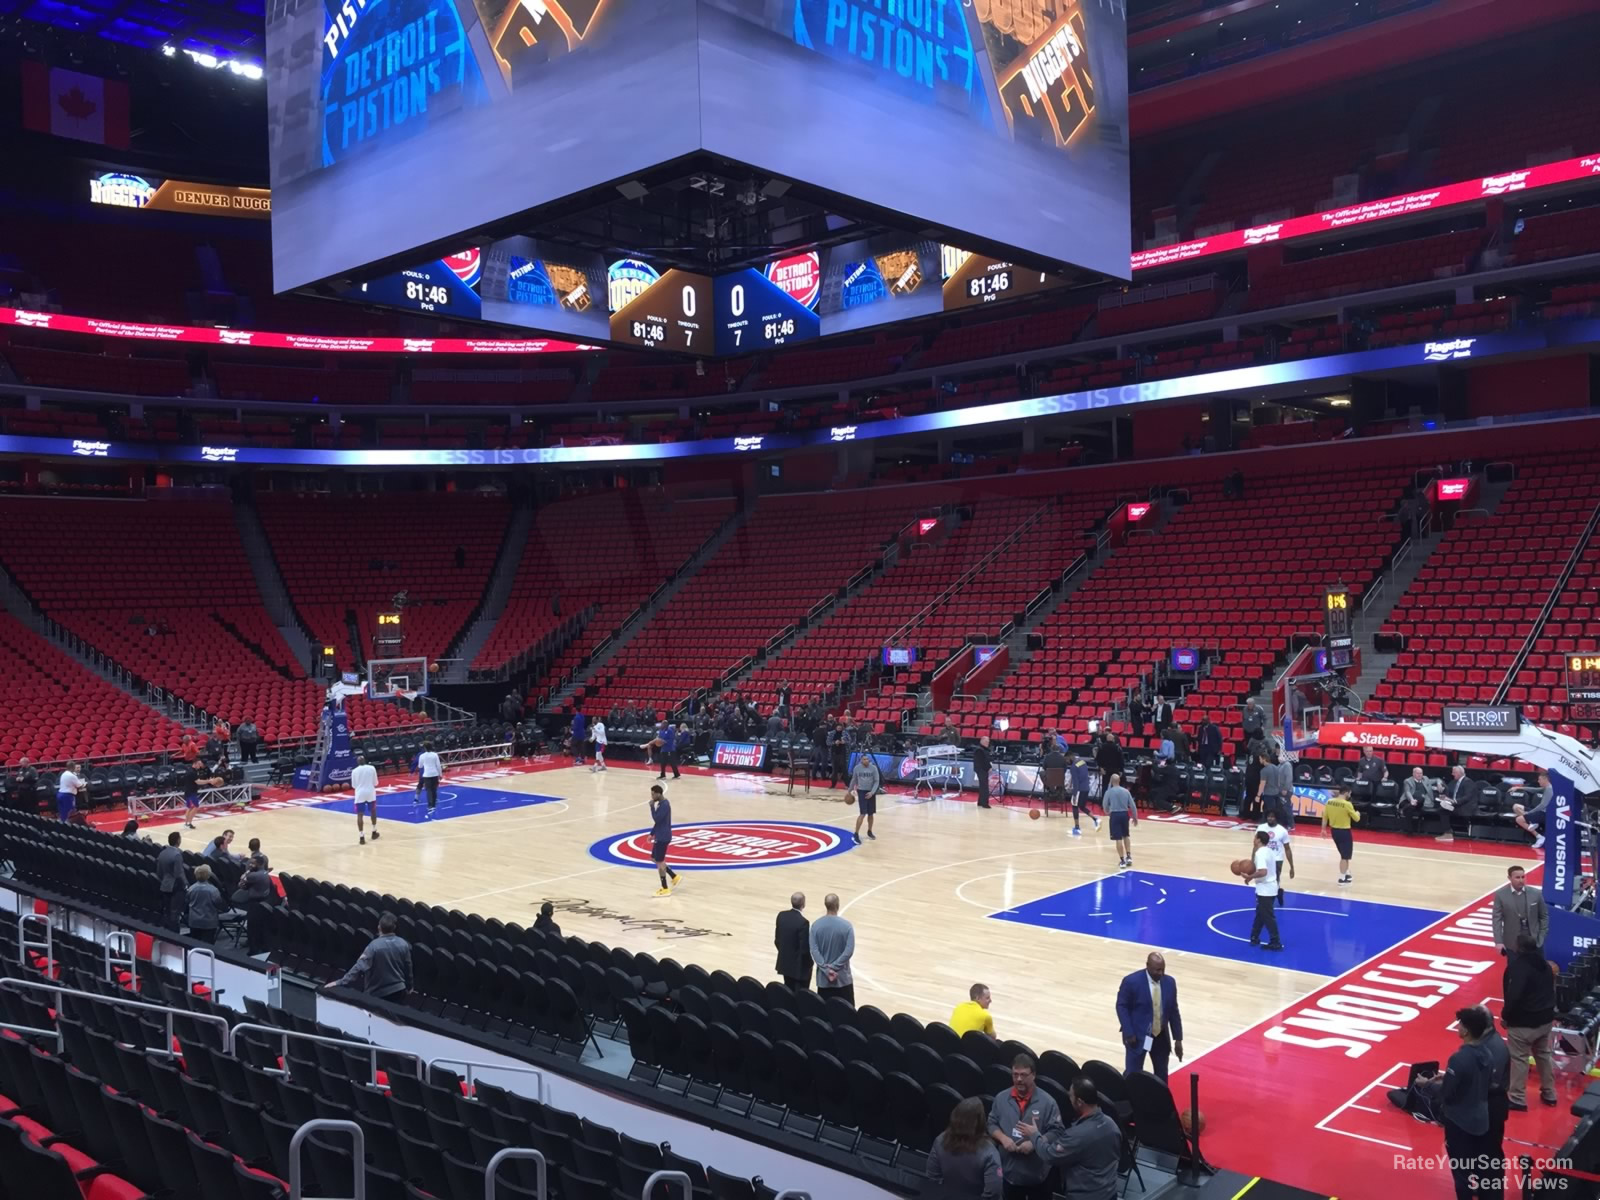 section 106, row 10 seat view  for basketball - little caesars arena